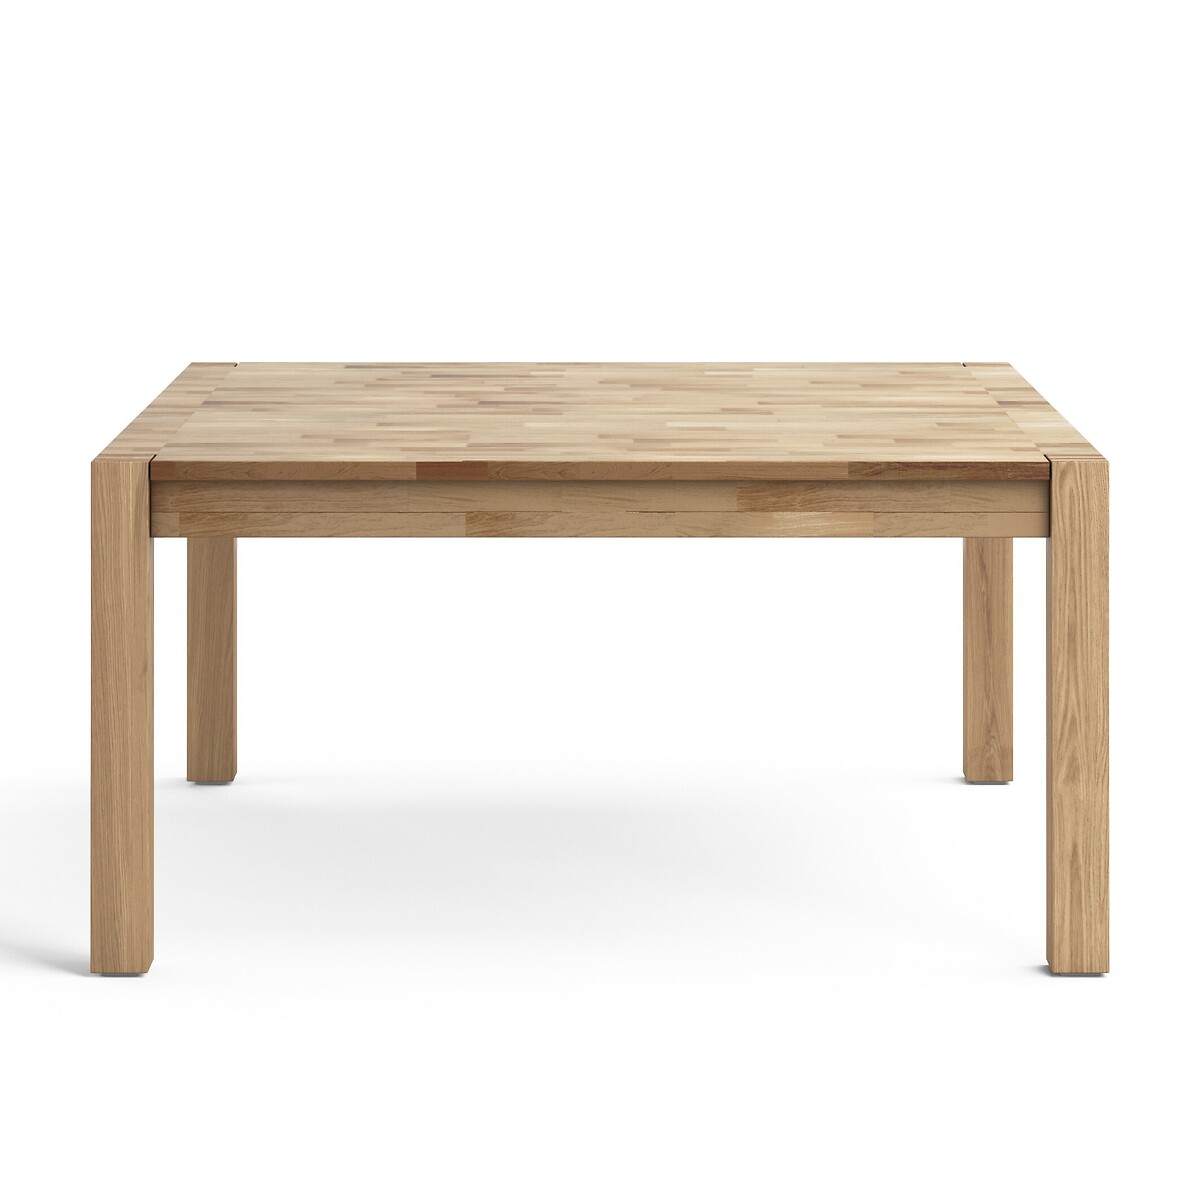 Adelita Square Dining Table, Seats 8